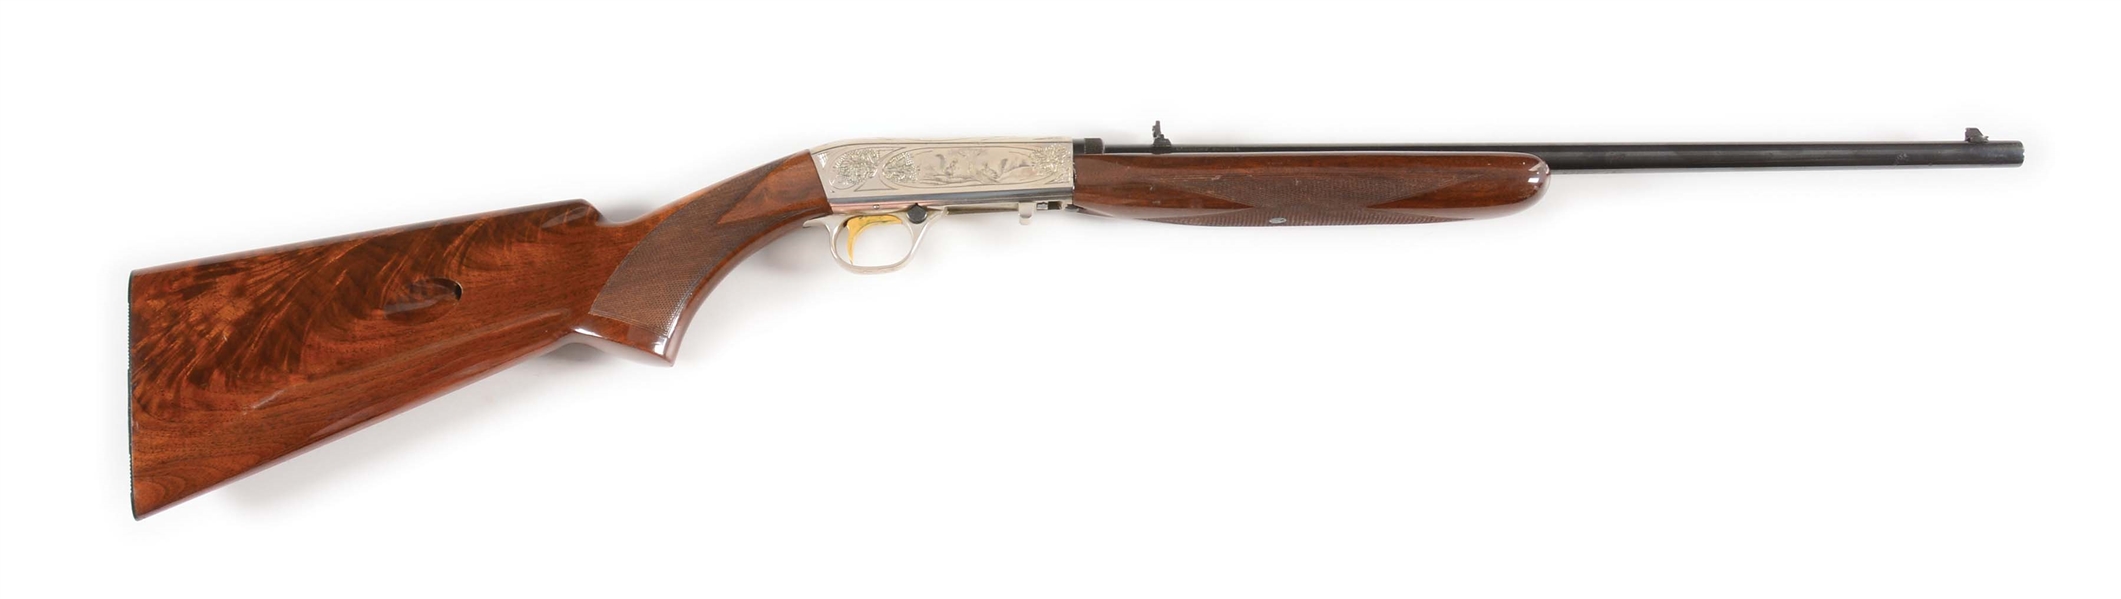 (C) ENGRAVED BROWNING BAR .22 SEMI-AUTOMATIC RIFLE (1969).